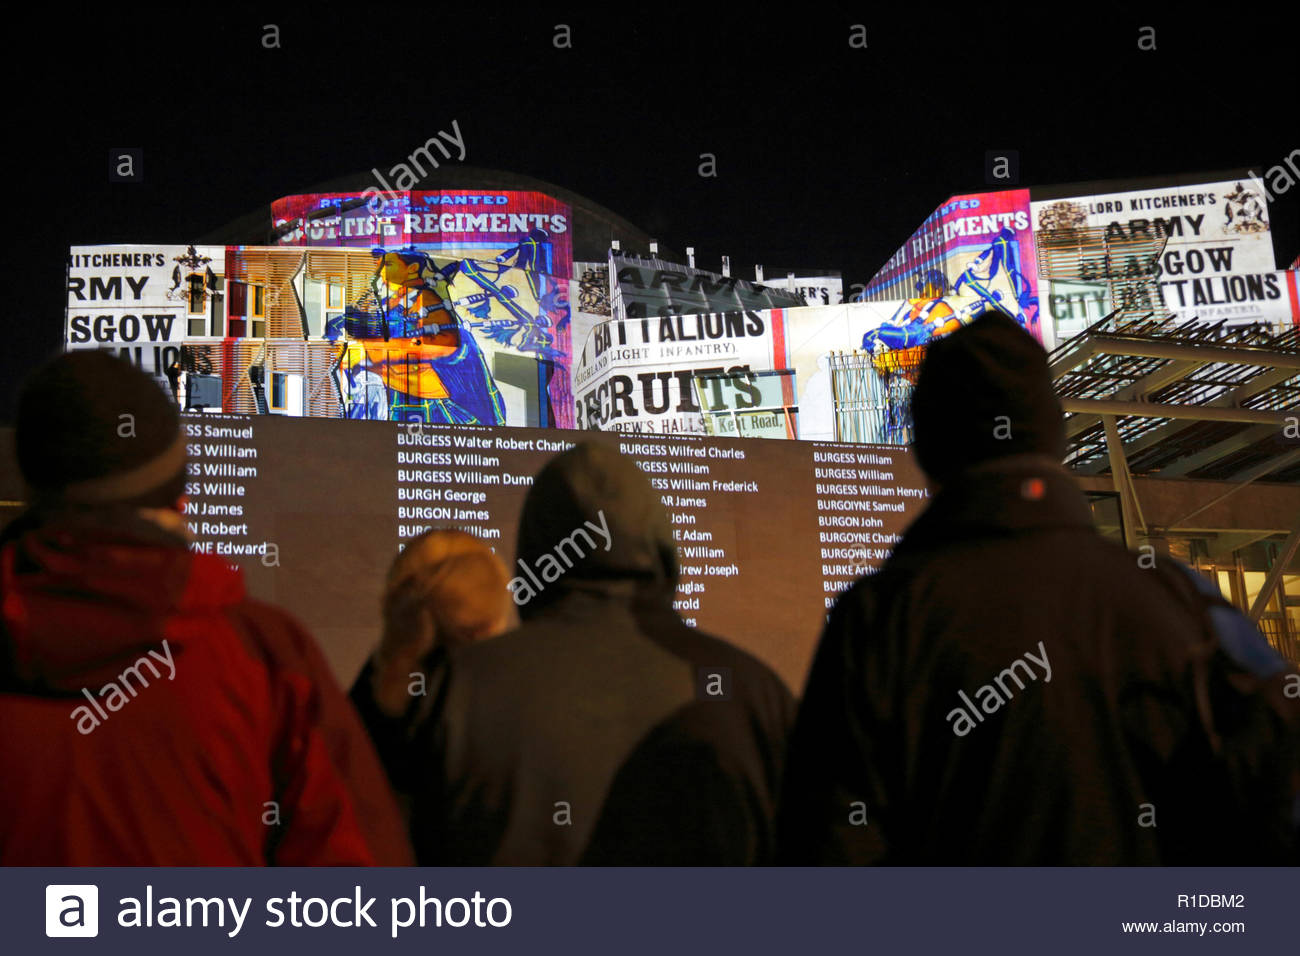 Edinburgh, United Kingdom. 11th November, 2018.  The Scottish Parliament building illuminated on Armistice day with images that tell the story of the world war 1 conflict alongside a Roll of Honour of those who died.   Credit: Craig Brown/Alamy Live News. Stock Photo